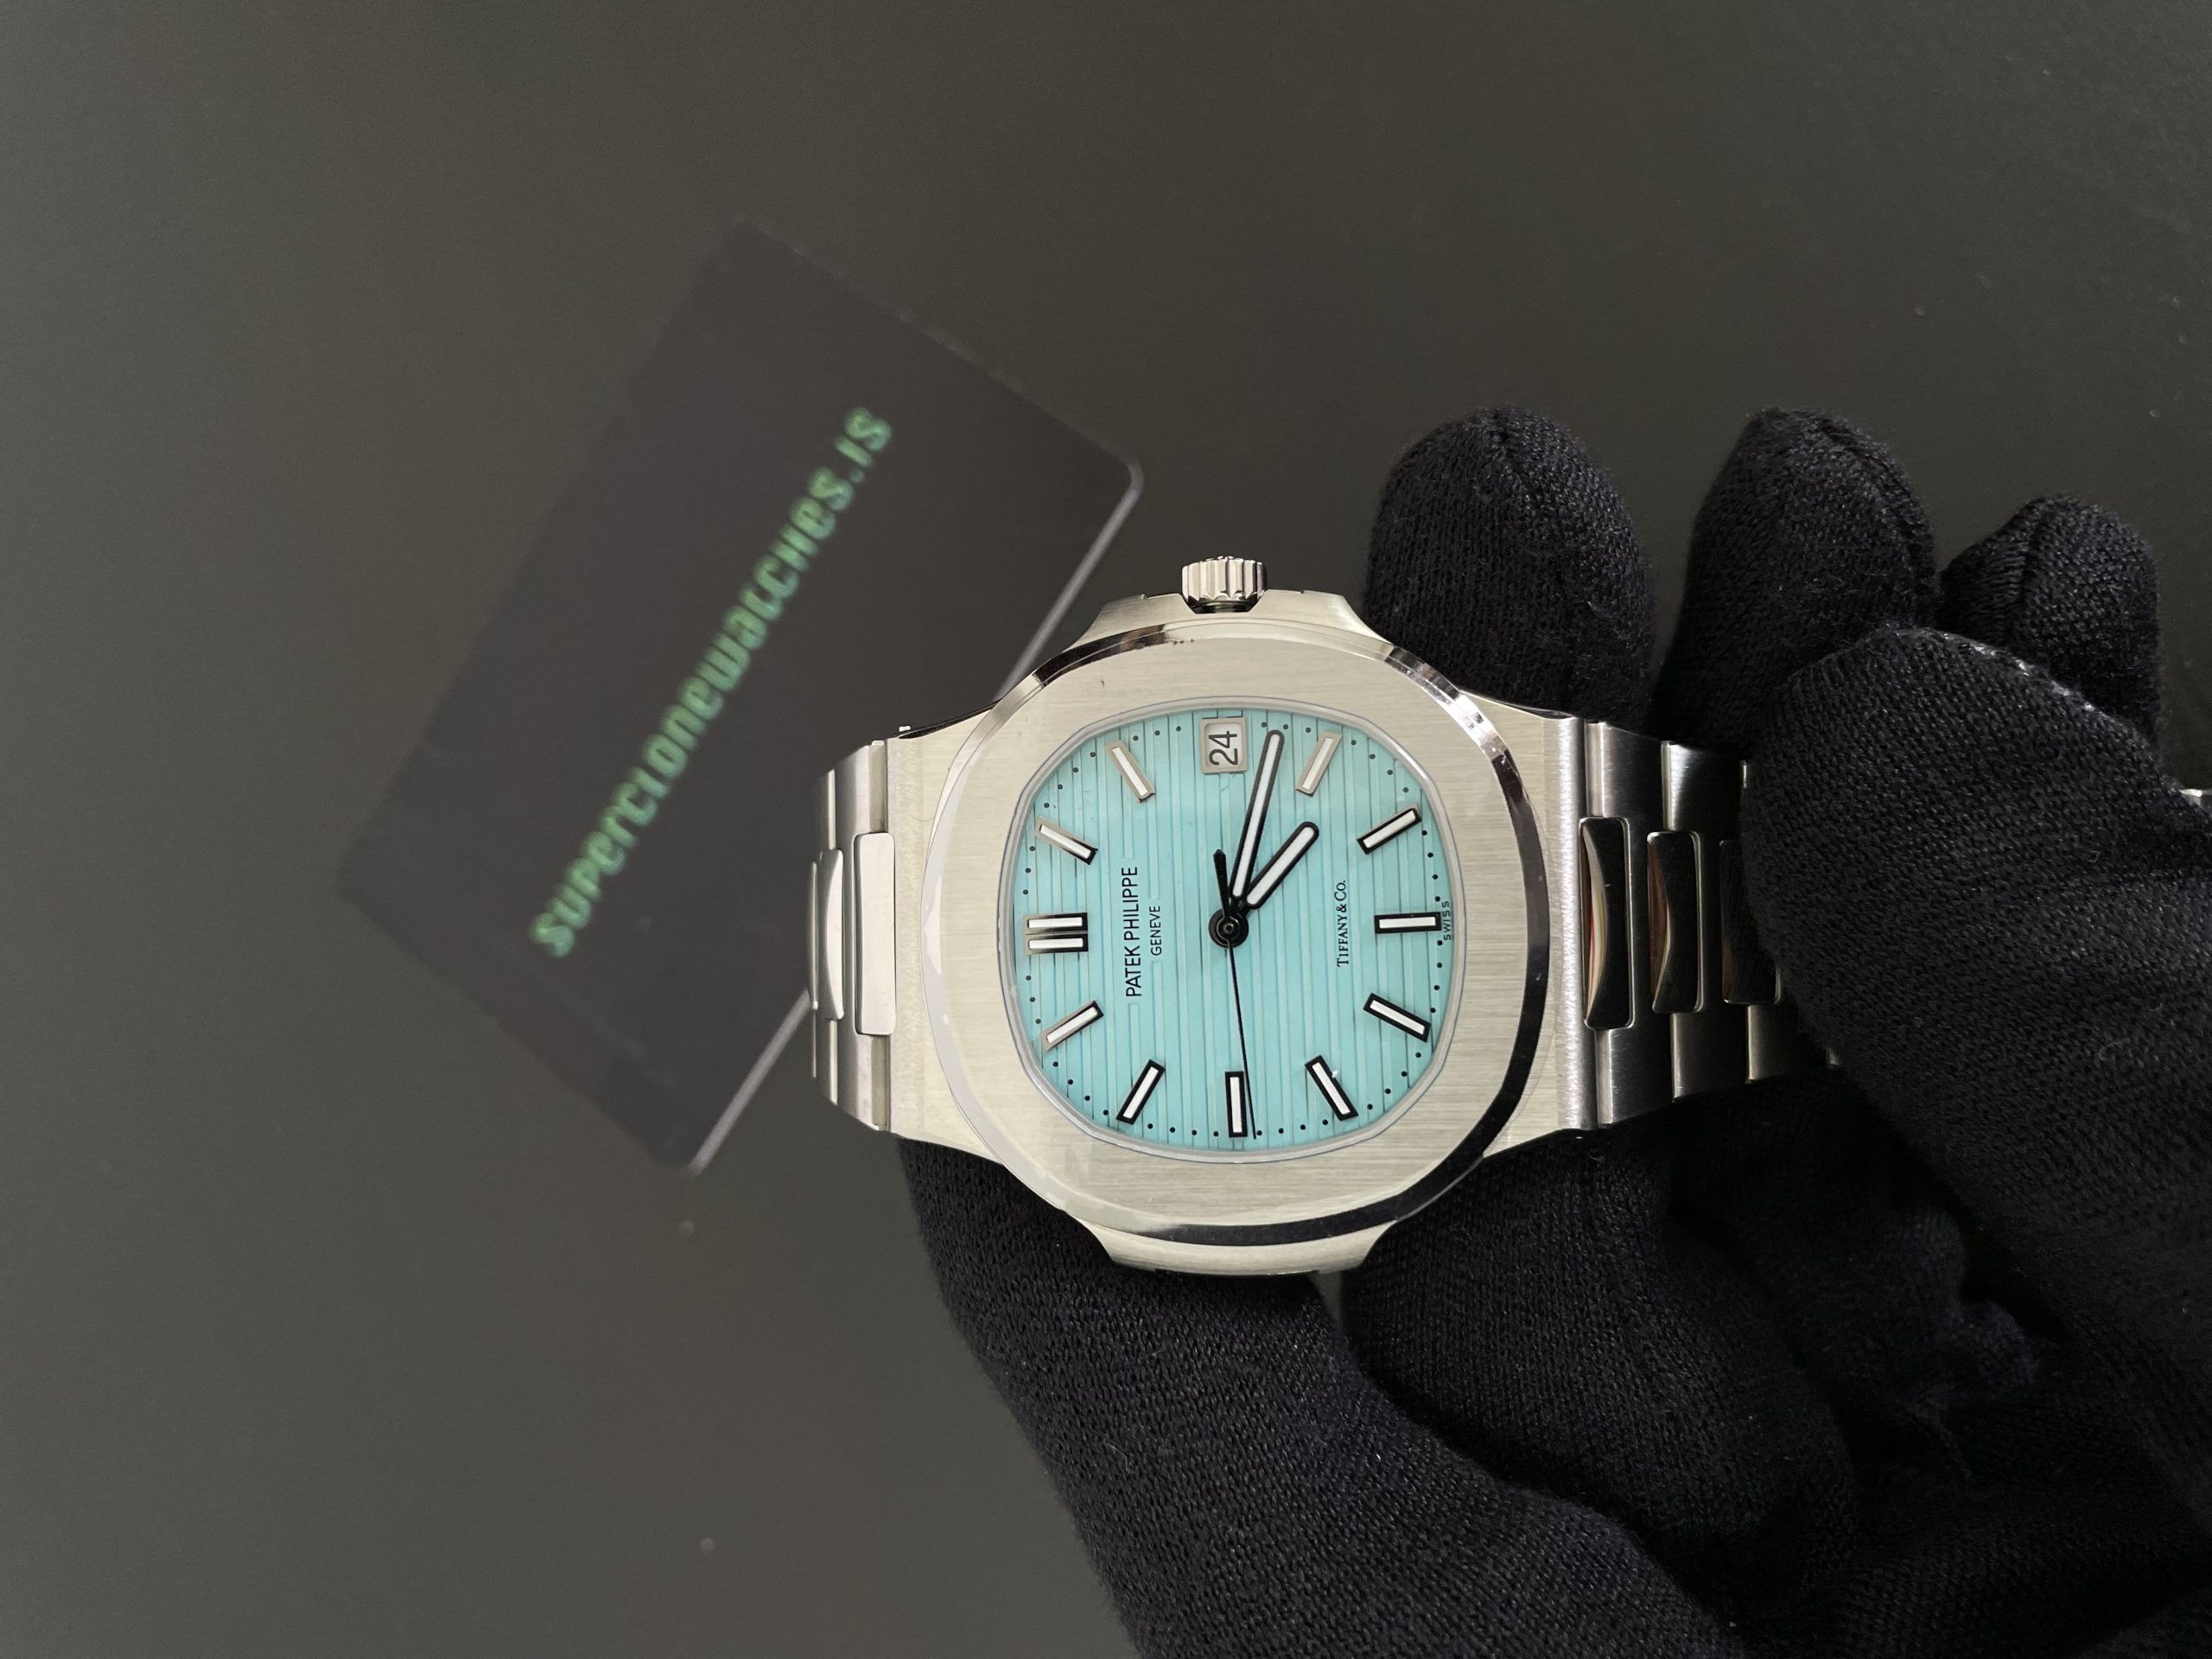 The Tiffany Ref. 5711/1A-018 – The Last Unicorn? Or Simply the Next  Unicorn? - Revolution Watch